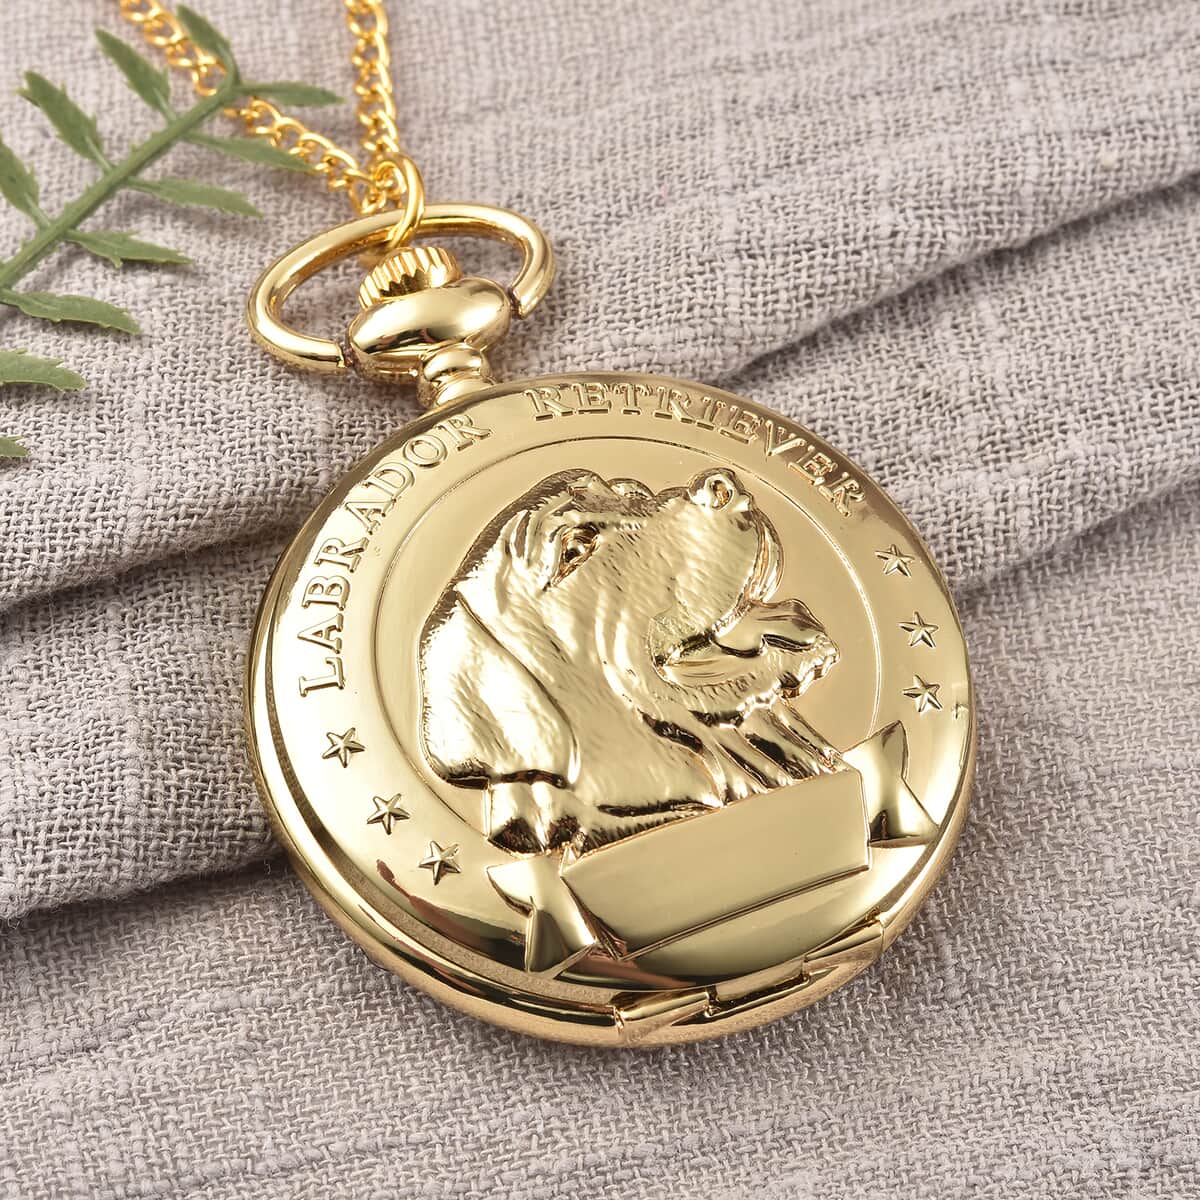 Strada Japanese Movement Labrador Pocket Watch in Goldtone with Chain (31 Inches) image number 1